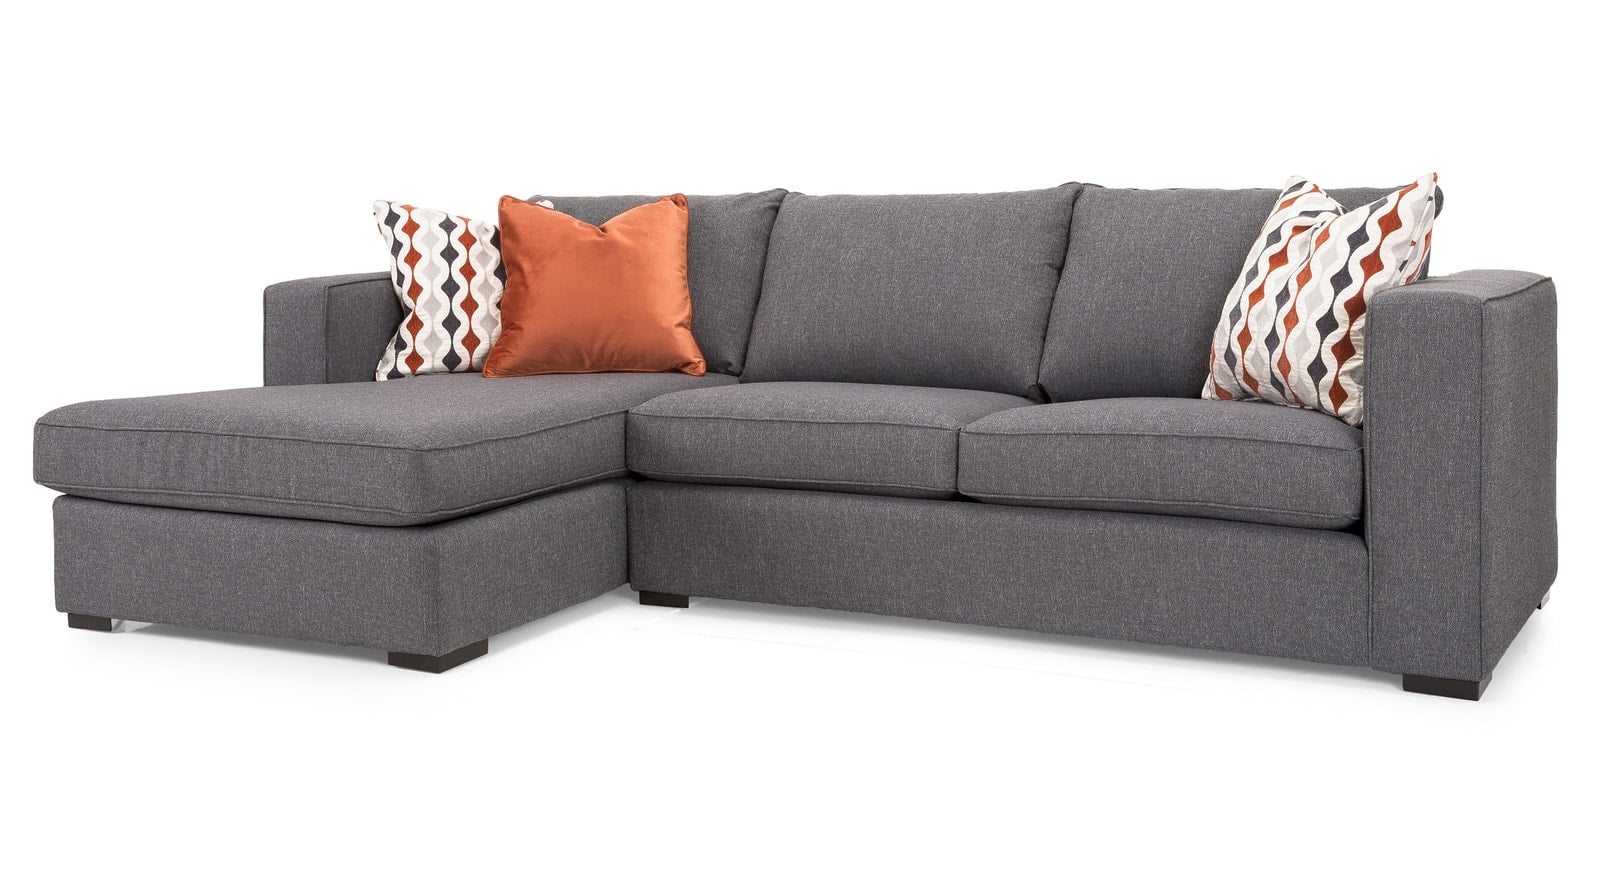 Comfortable sofa chaise sectional.